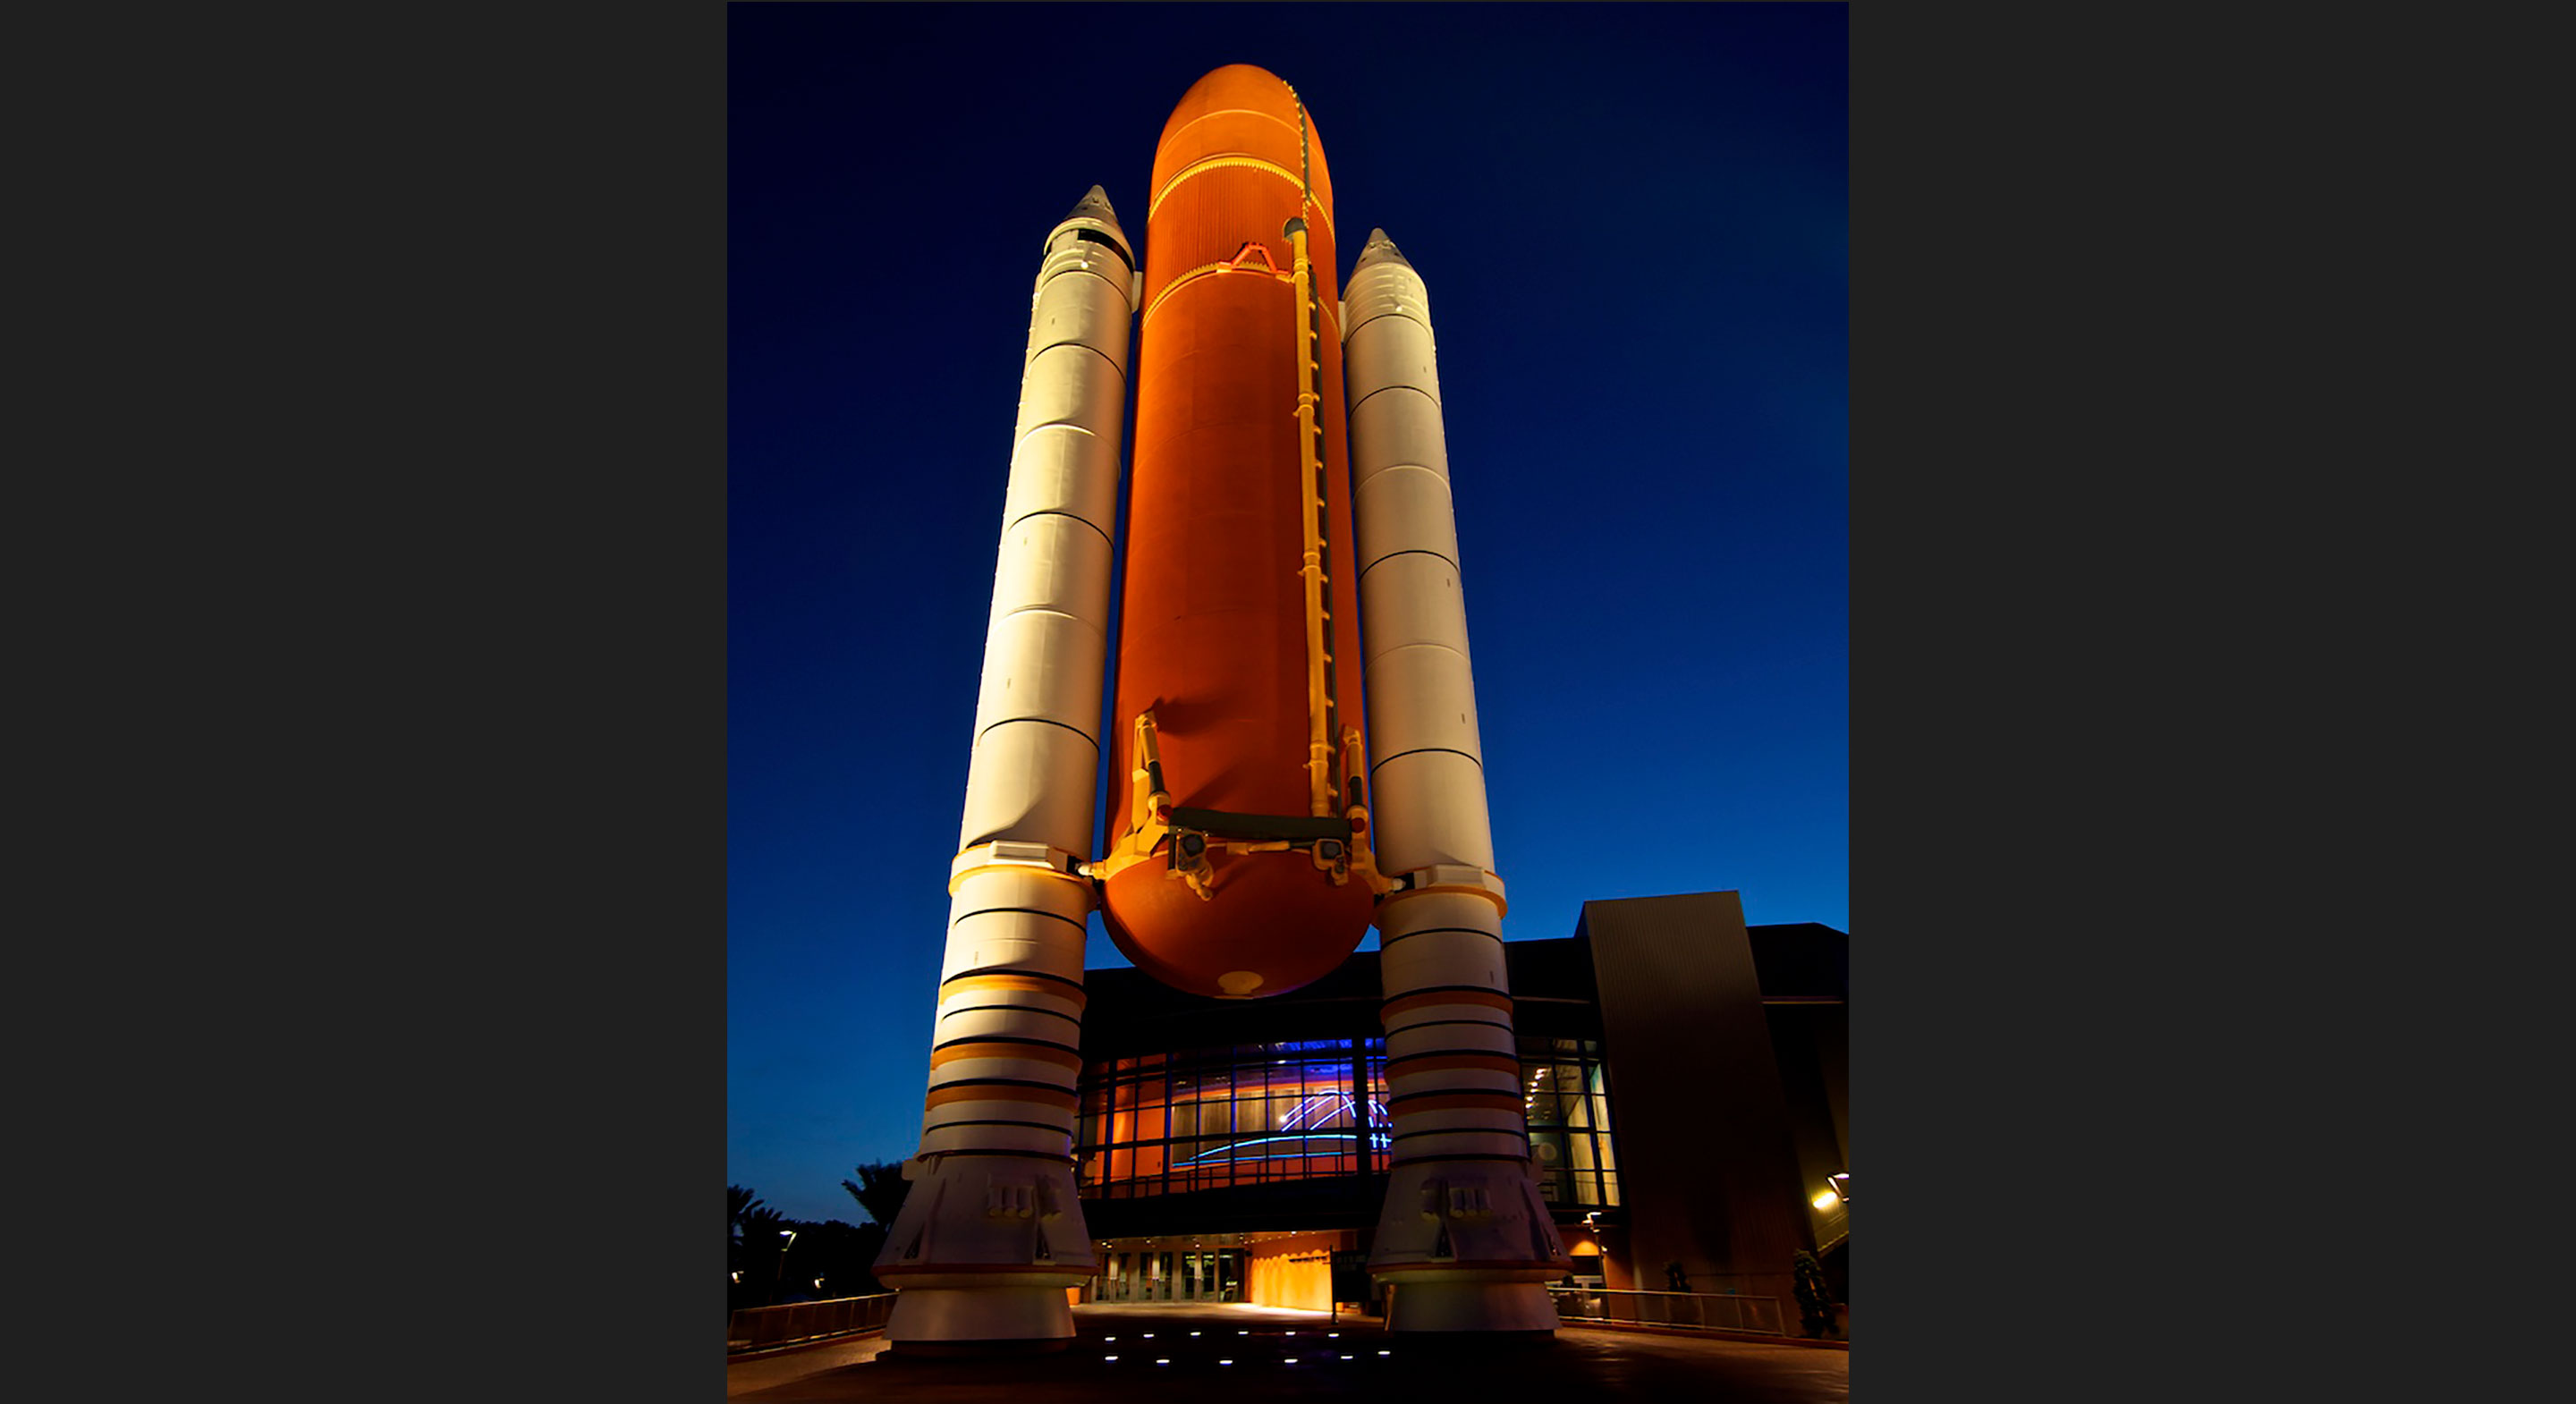 Kennedy-Space-Center-Visitor_Space-Shuttle-Atlantis_6